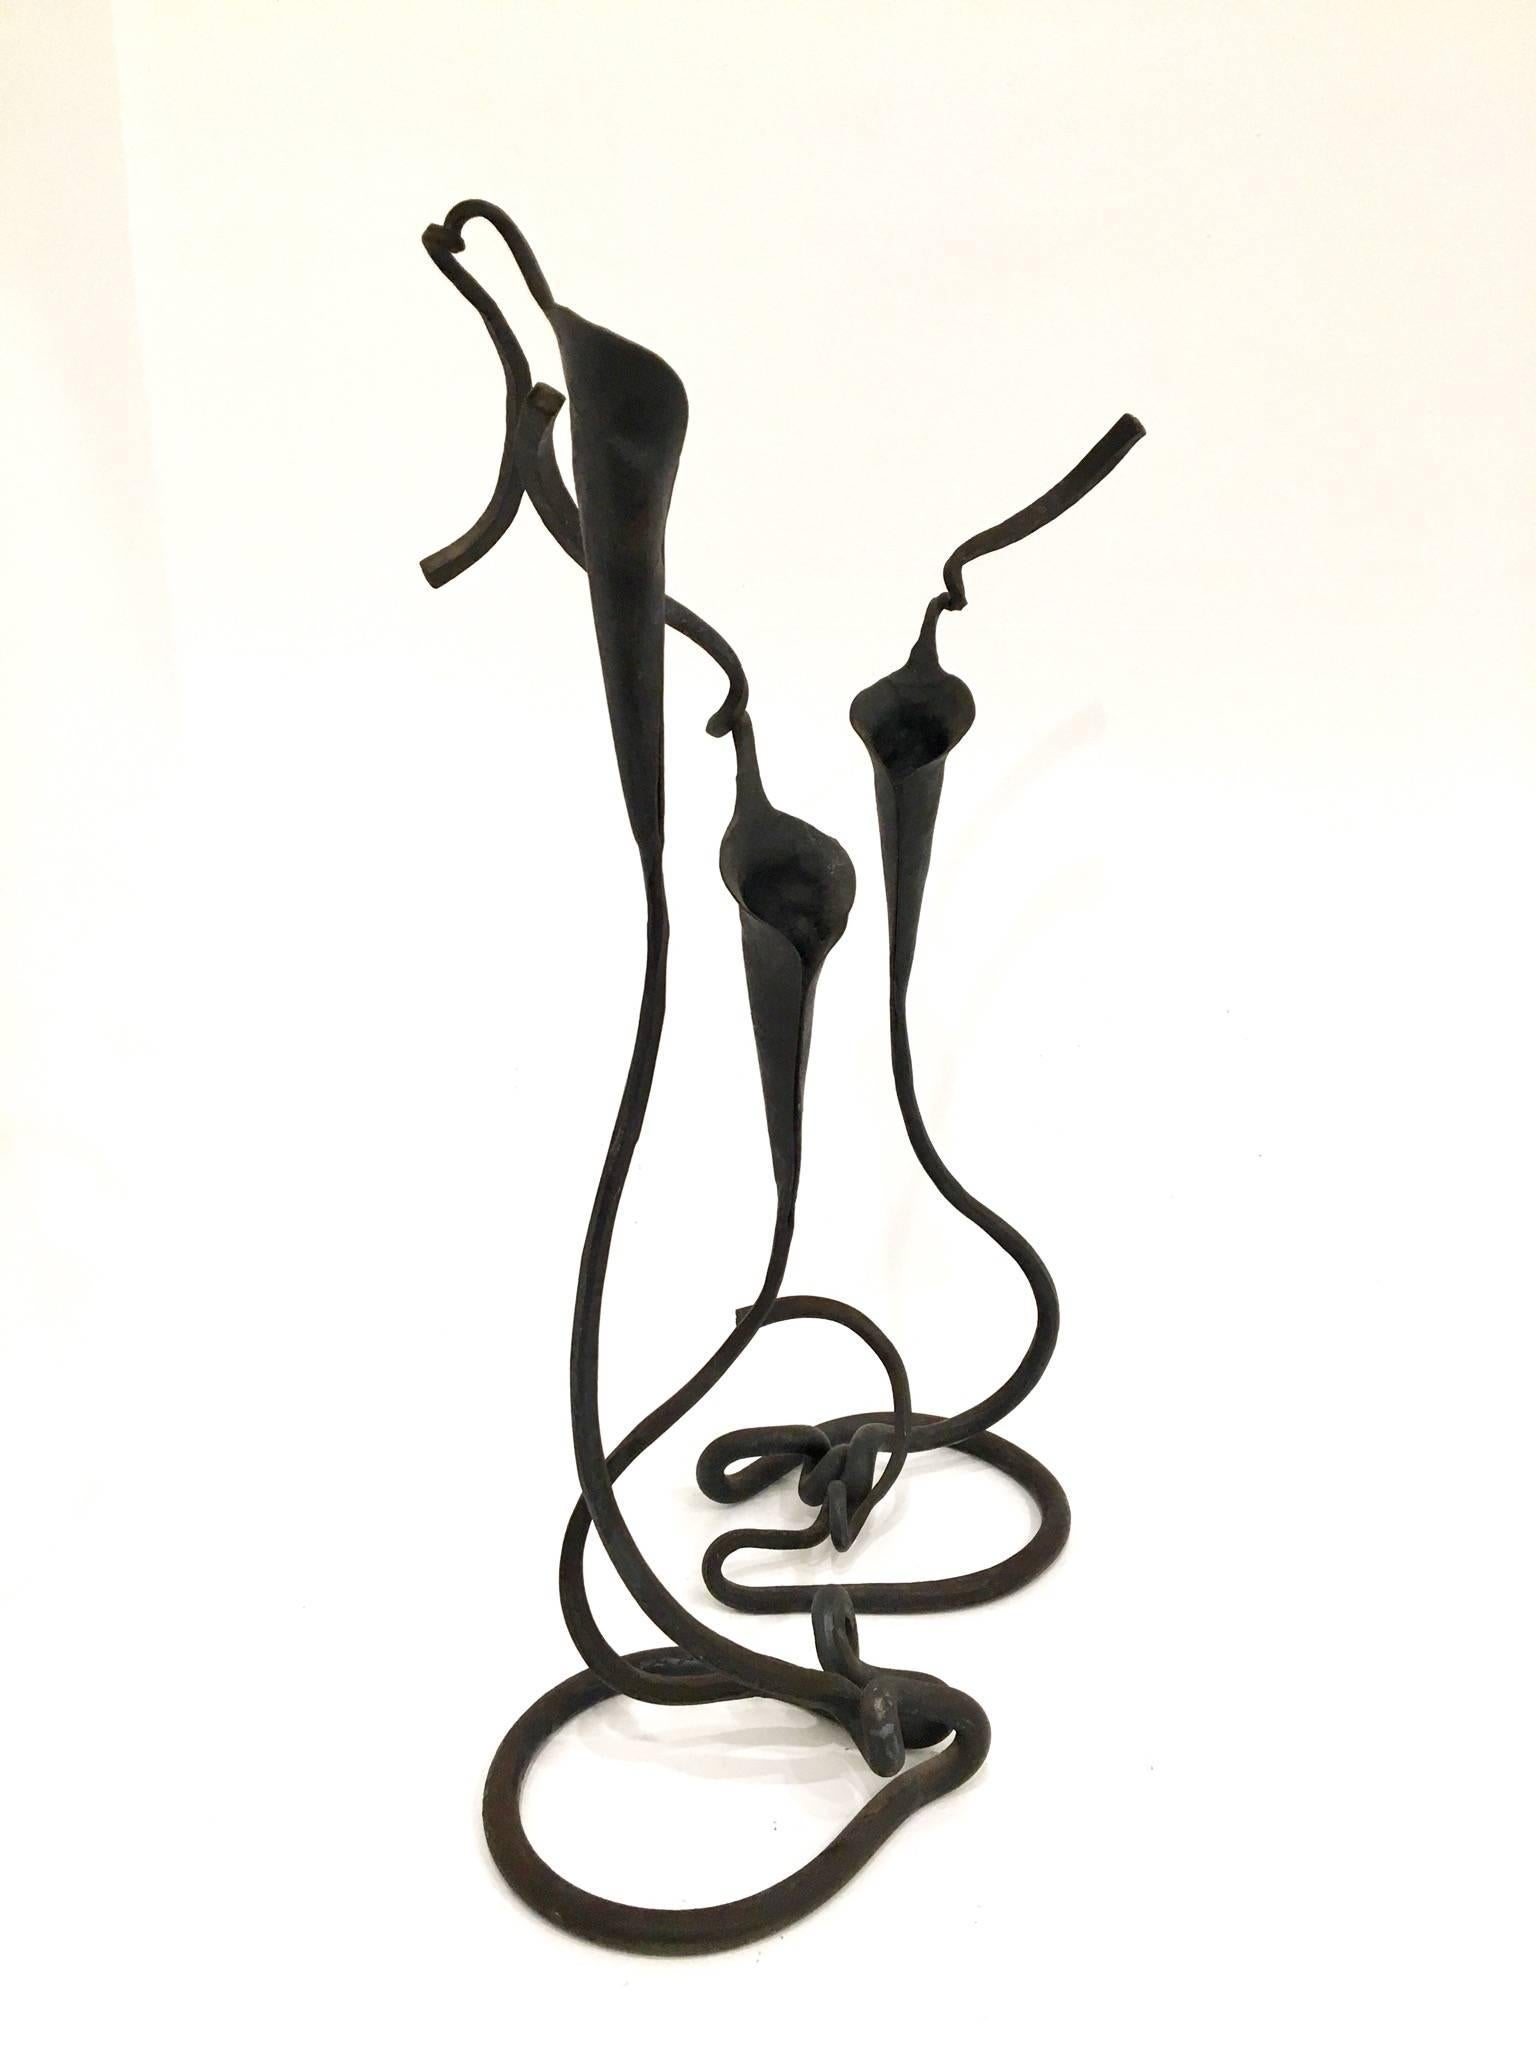 Stylish pair of hand-wrought iron Lily candlesticks by artist, designer and blacksmith Jack Brubaker.